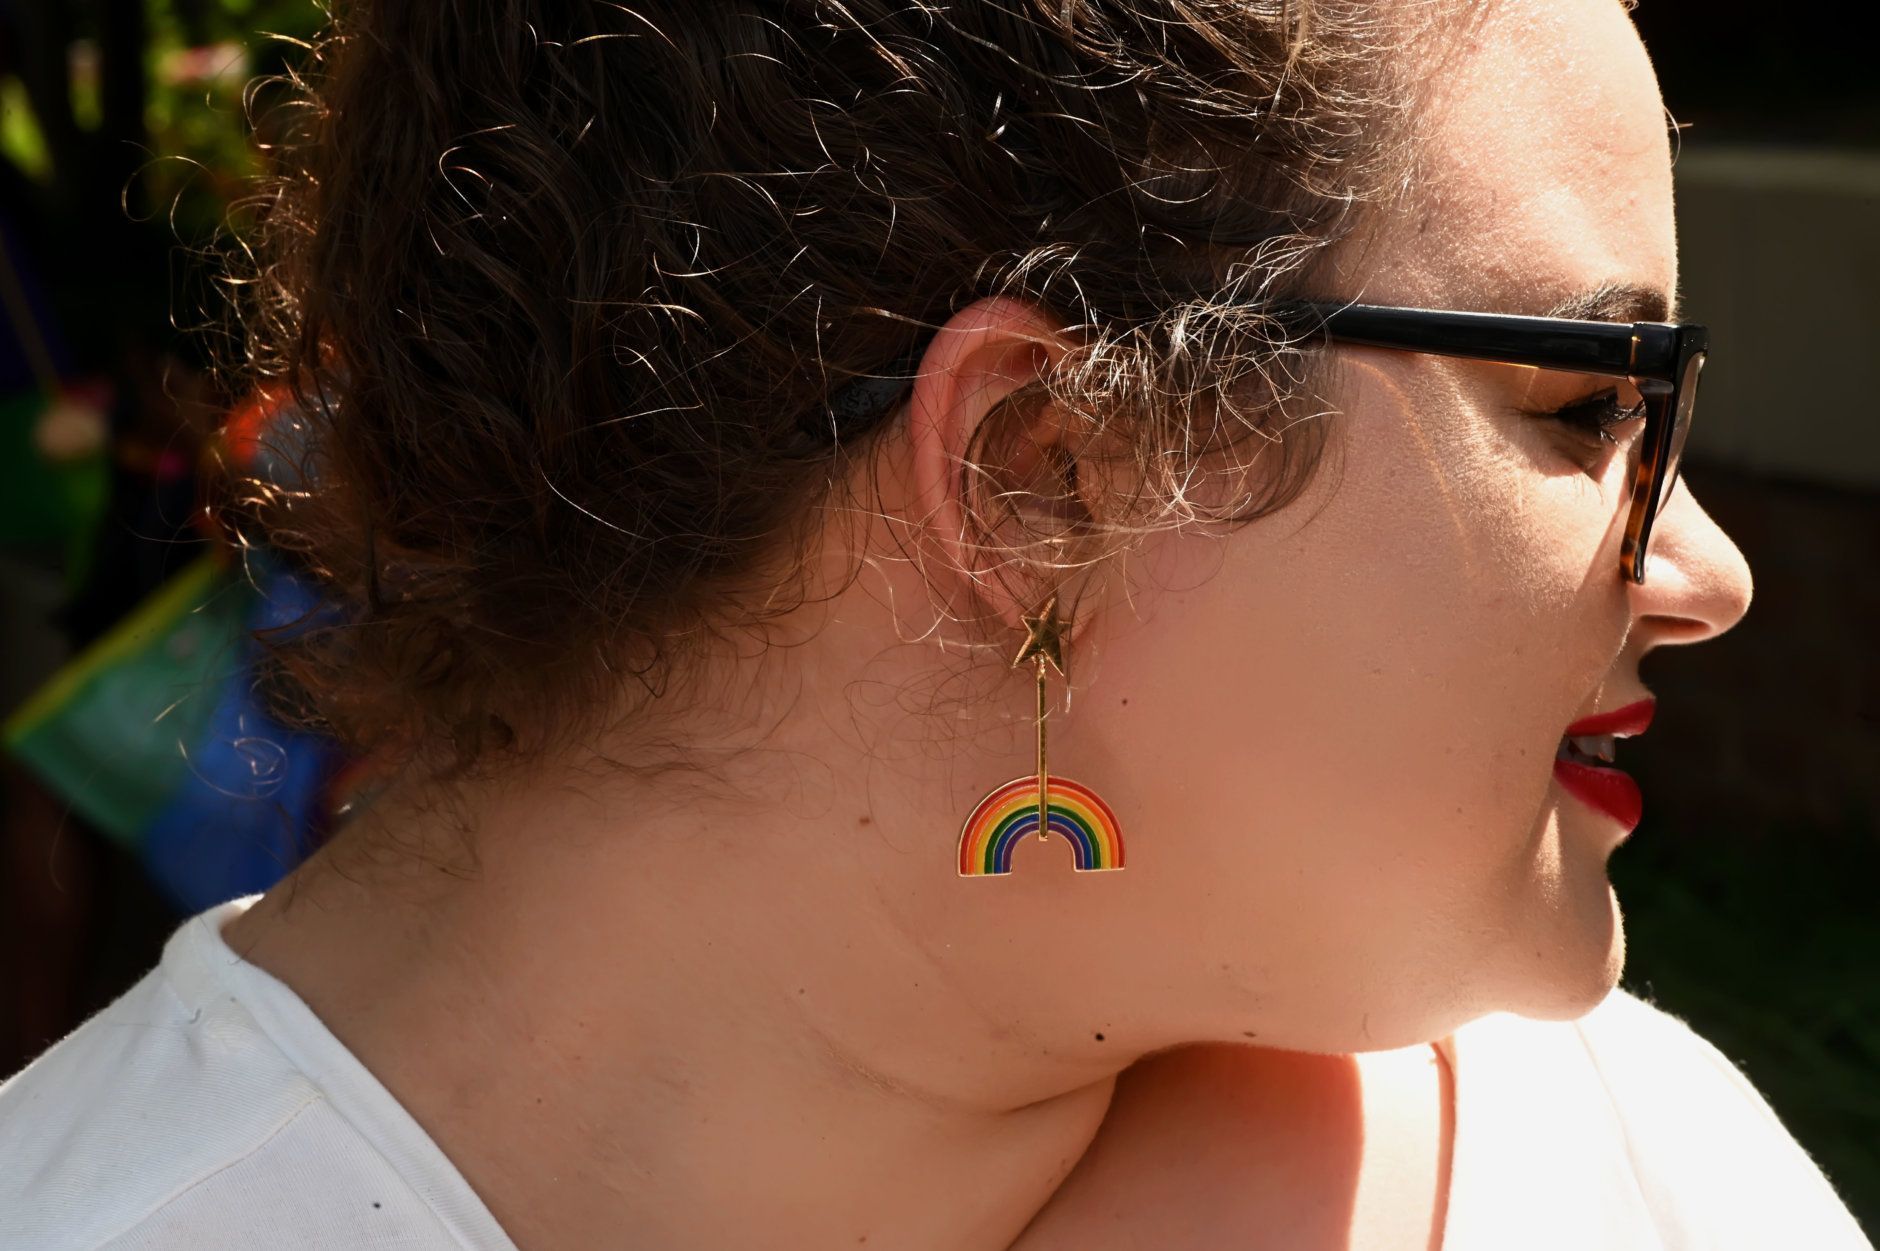 The rainbow flag was everywhere, including on jewelry, during the 2019 Capital Pride Parade. (Courtesy Shannon Finney Photography)